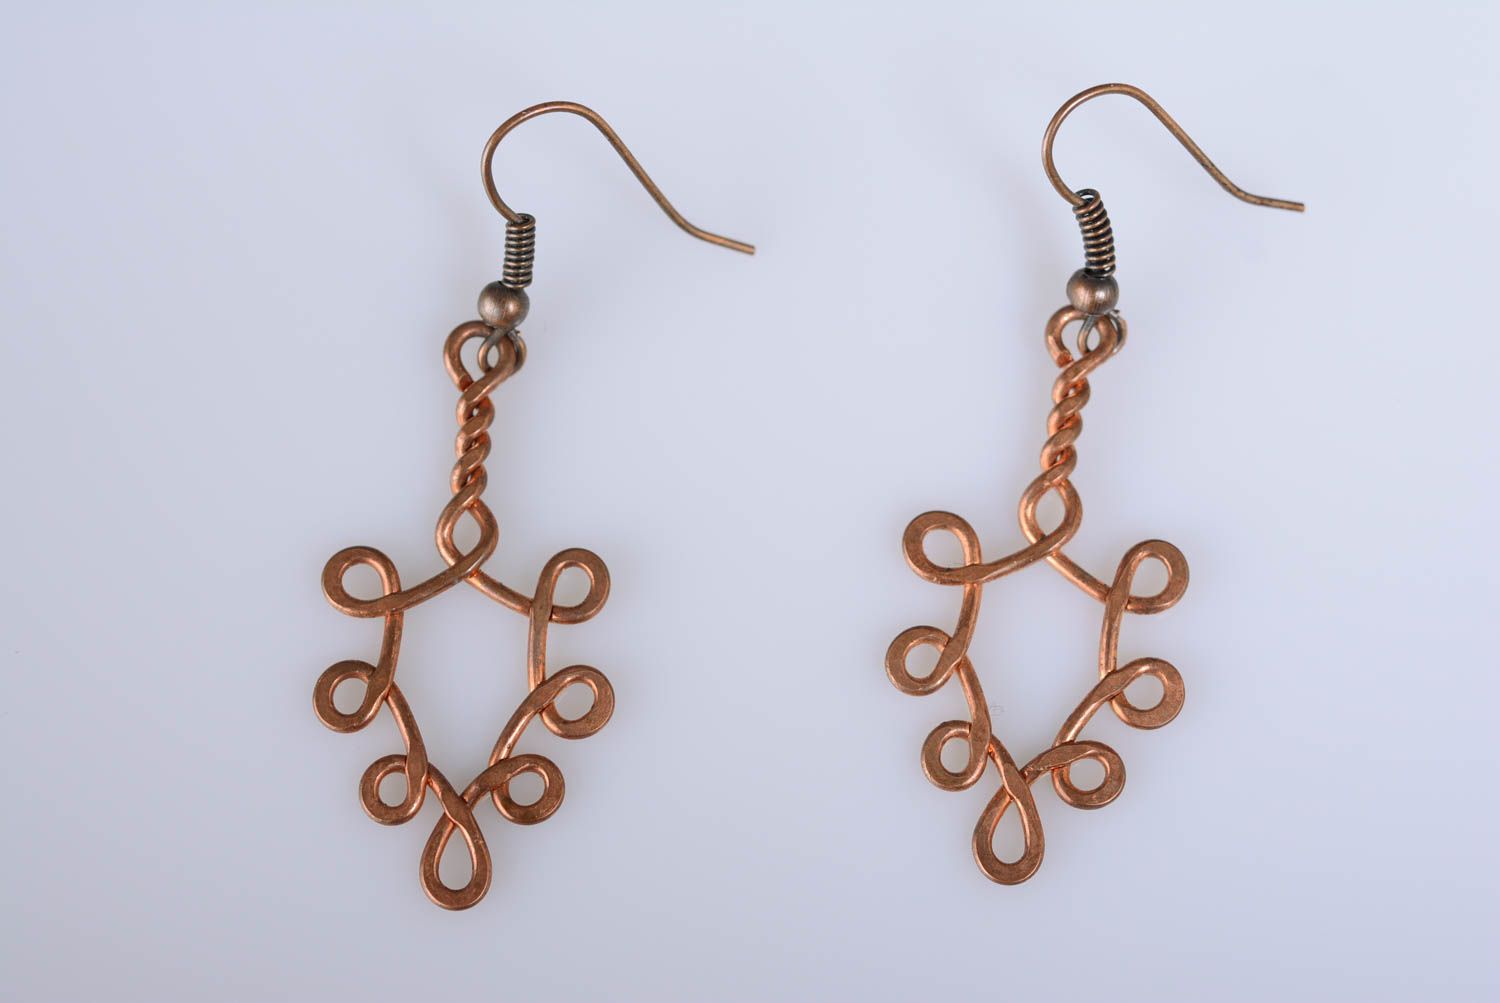 Massive earrings made of copper using wire wrap technique beautiful accessory photo 4